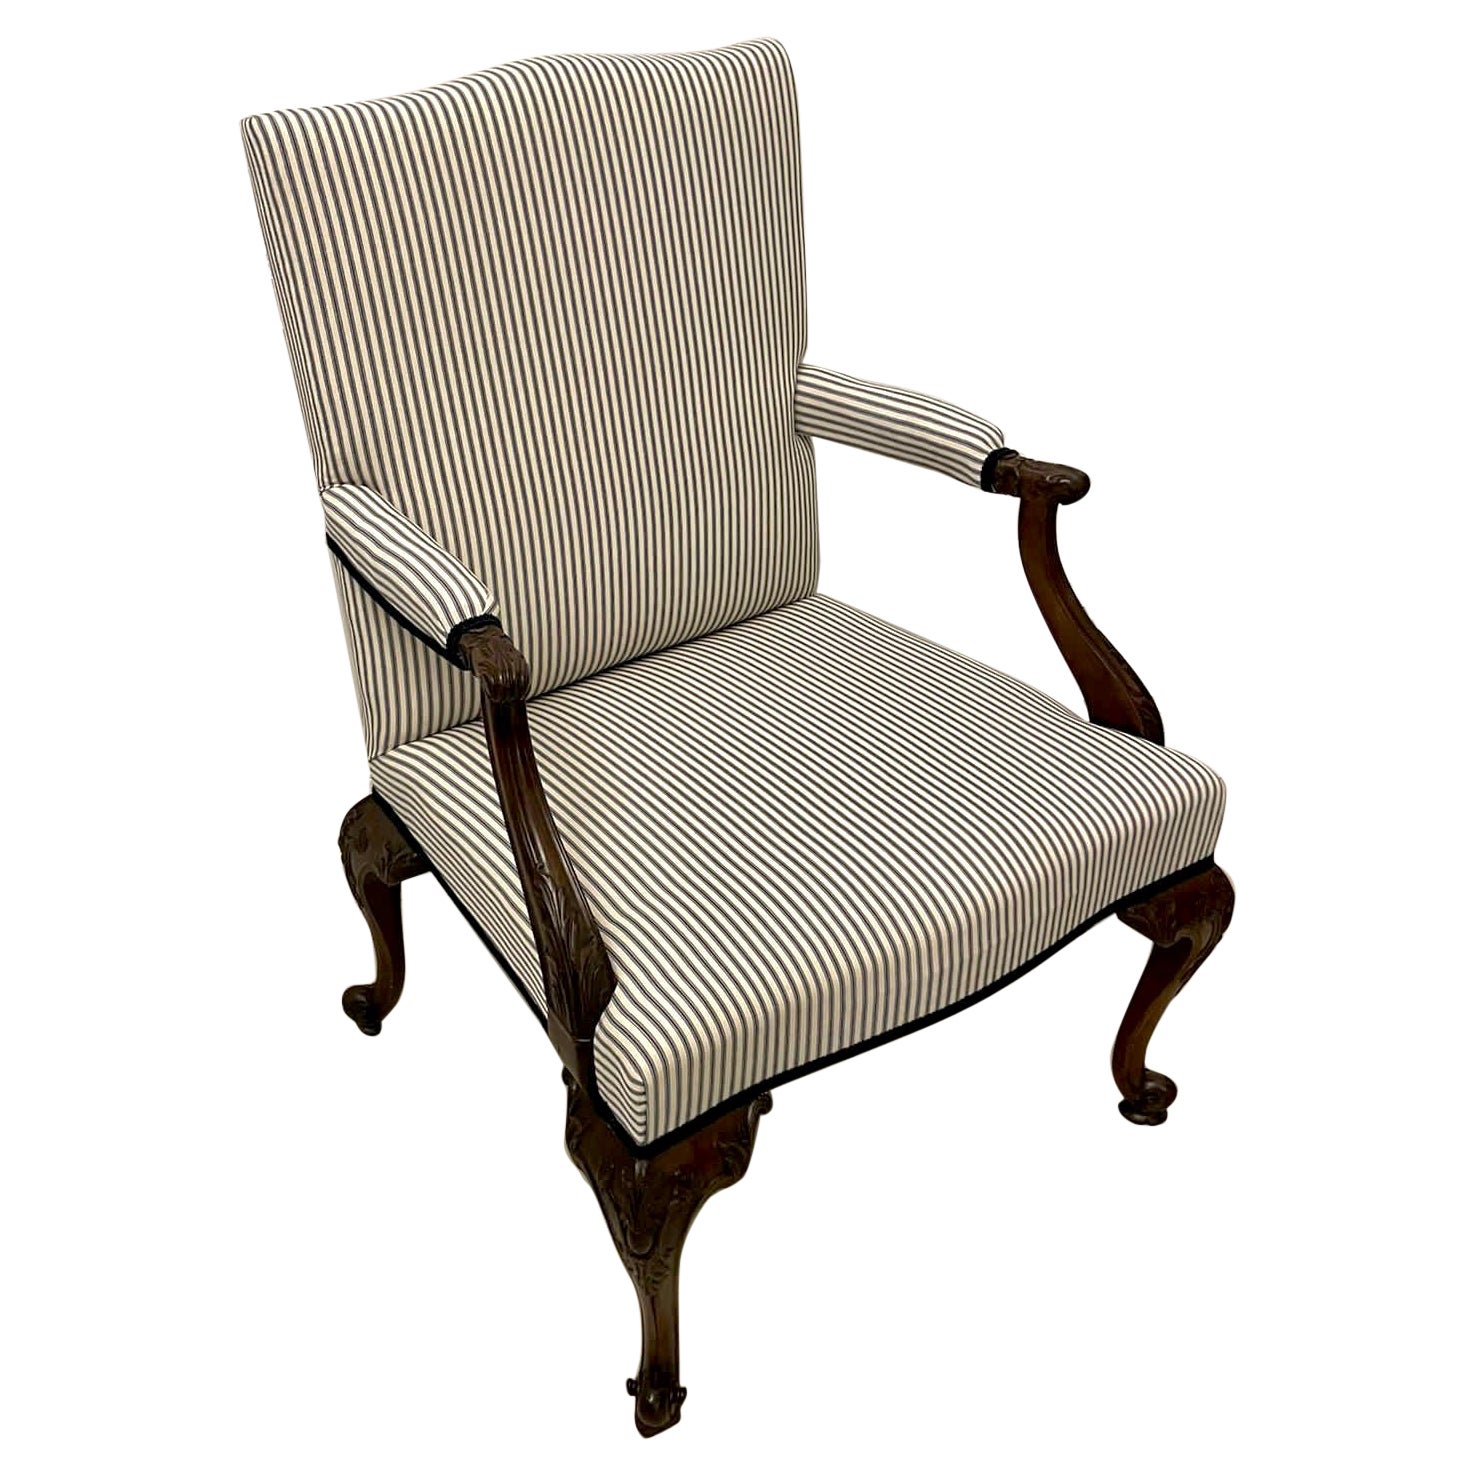 Outstanding Quality Large Antique Carved Mahogany Gainsborough Armchair For Sale